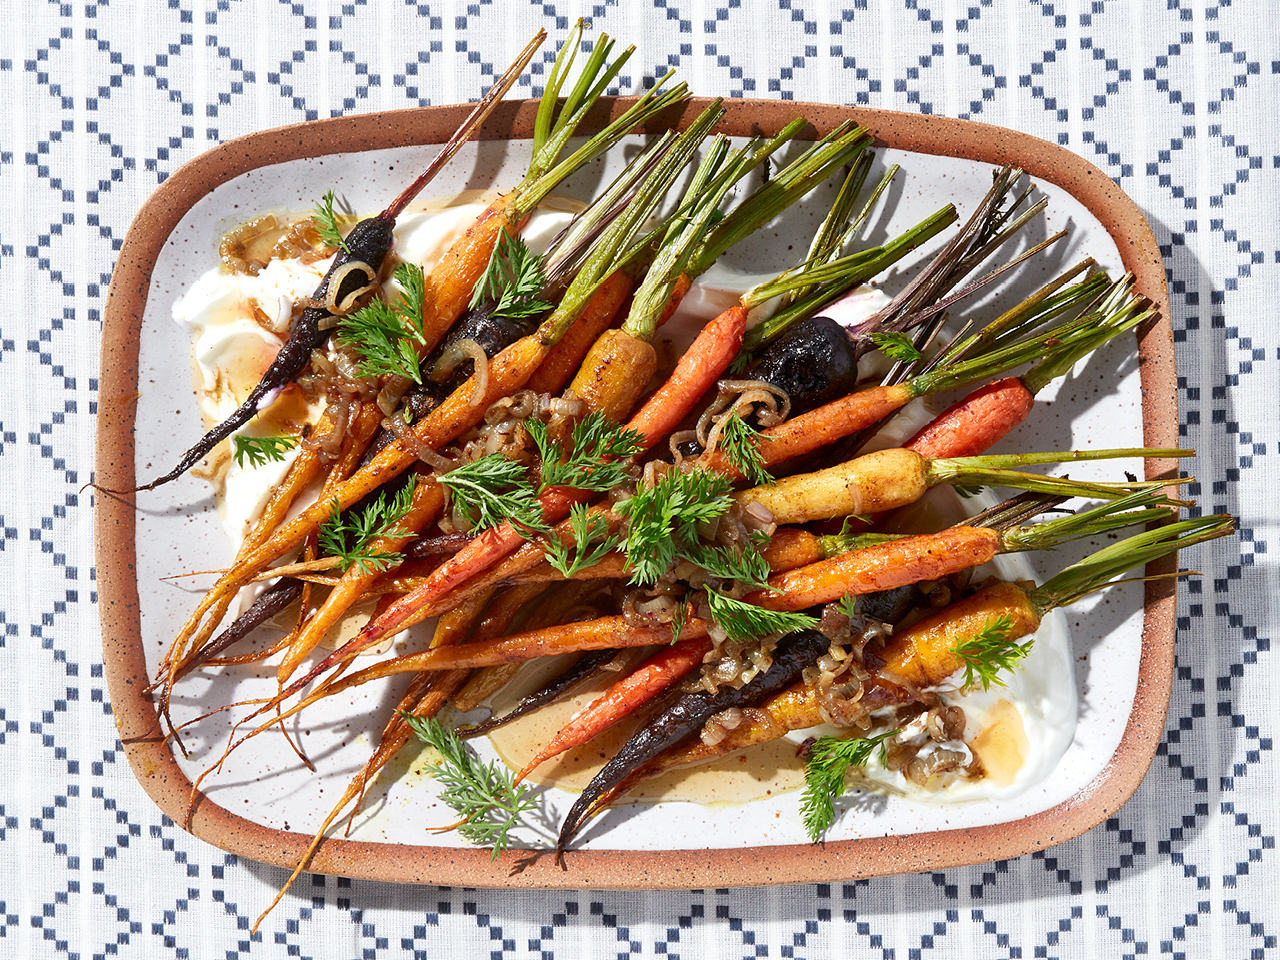 Roasted Spiced Carrots With Caramelized Shallots